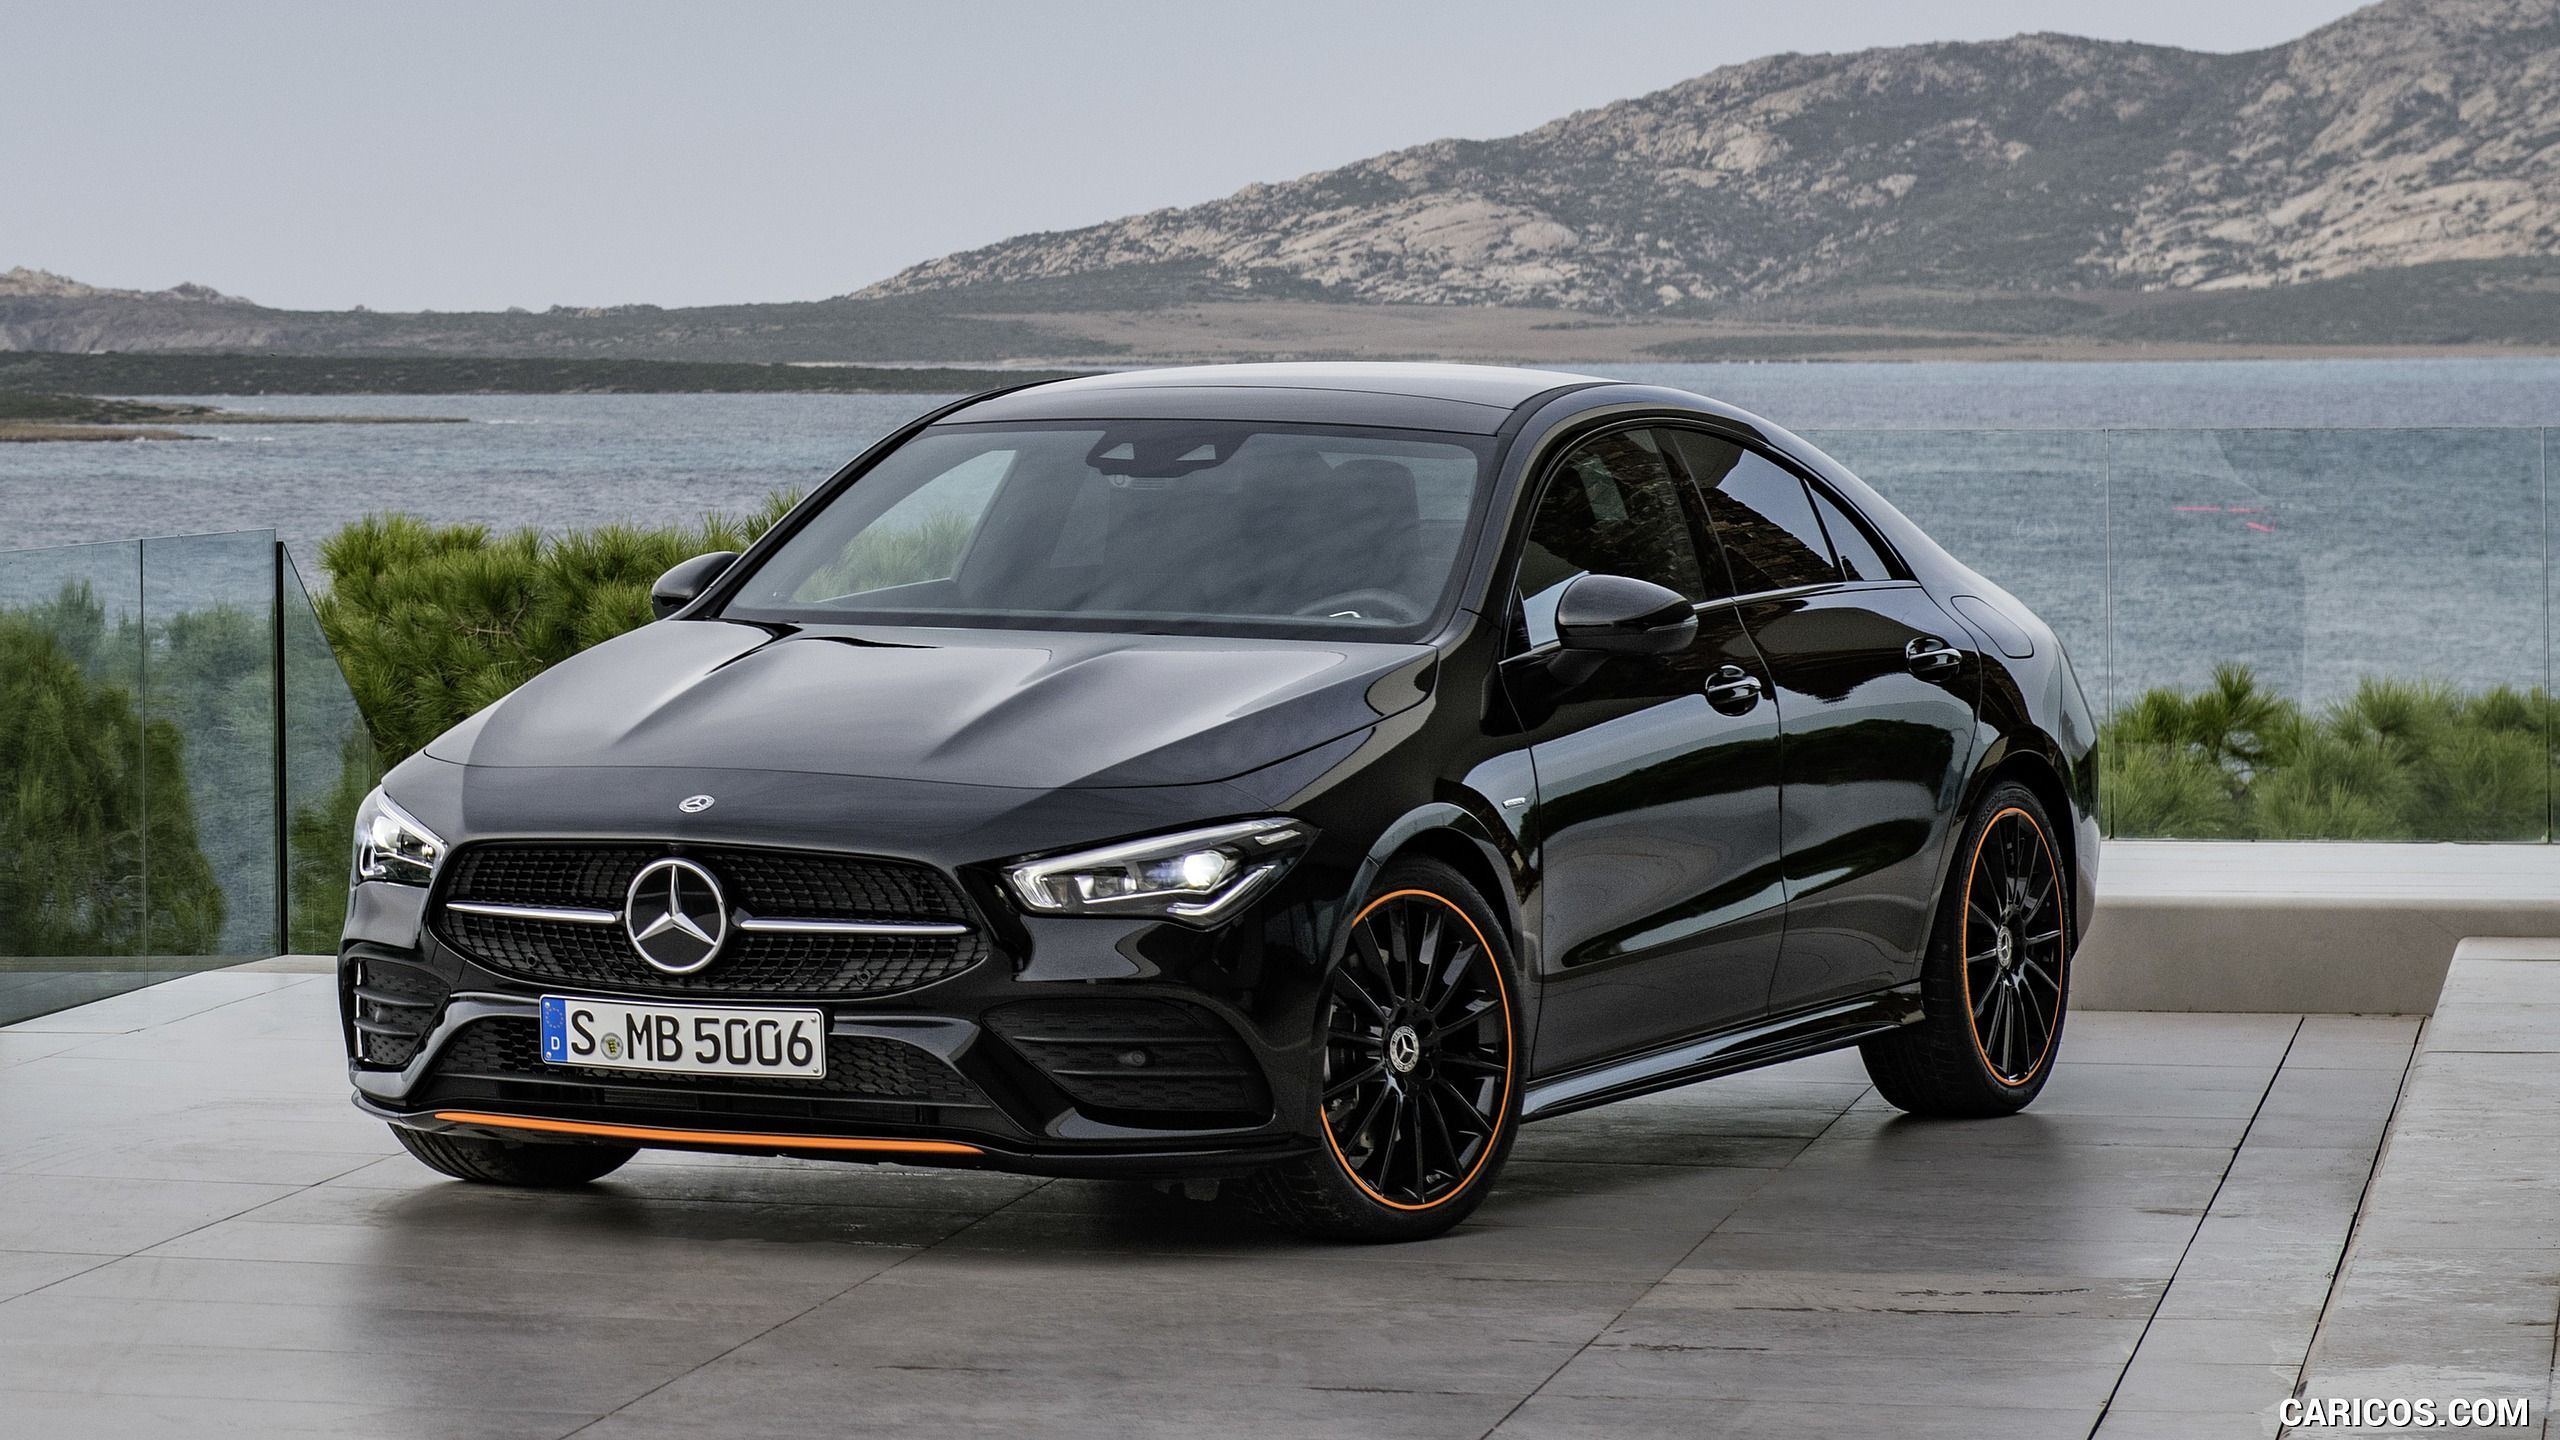 9 Reasons To Buy The 2020 Mercedes-Benz CLA 250 (1 Good Reason To Avoid It)